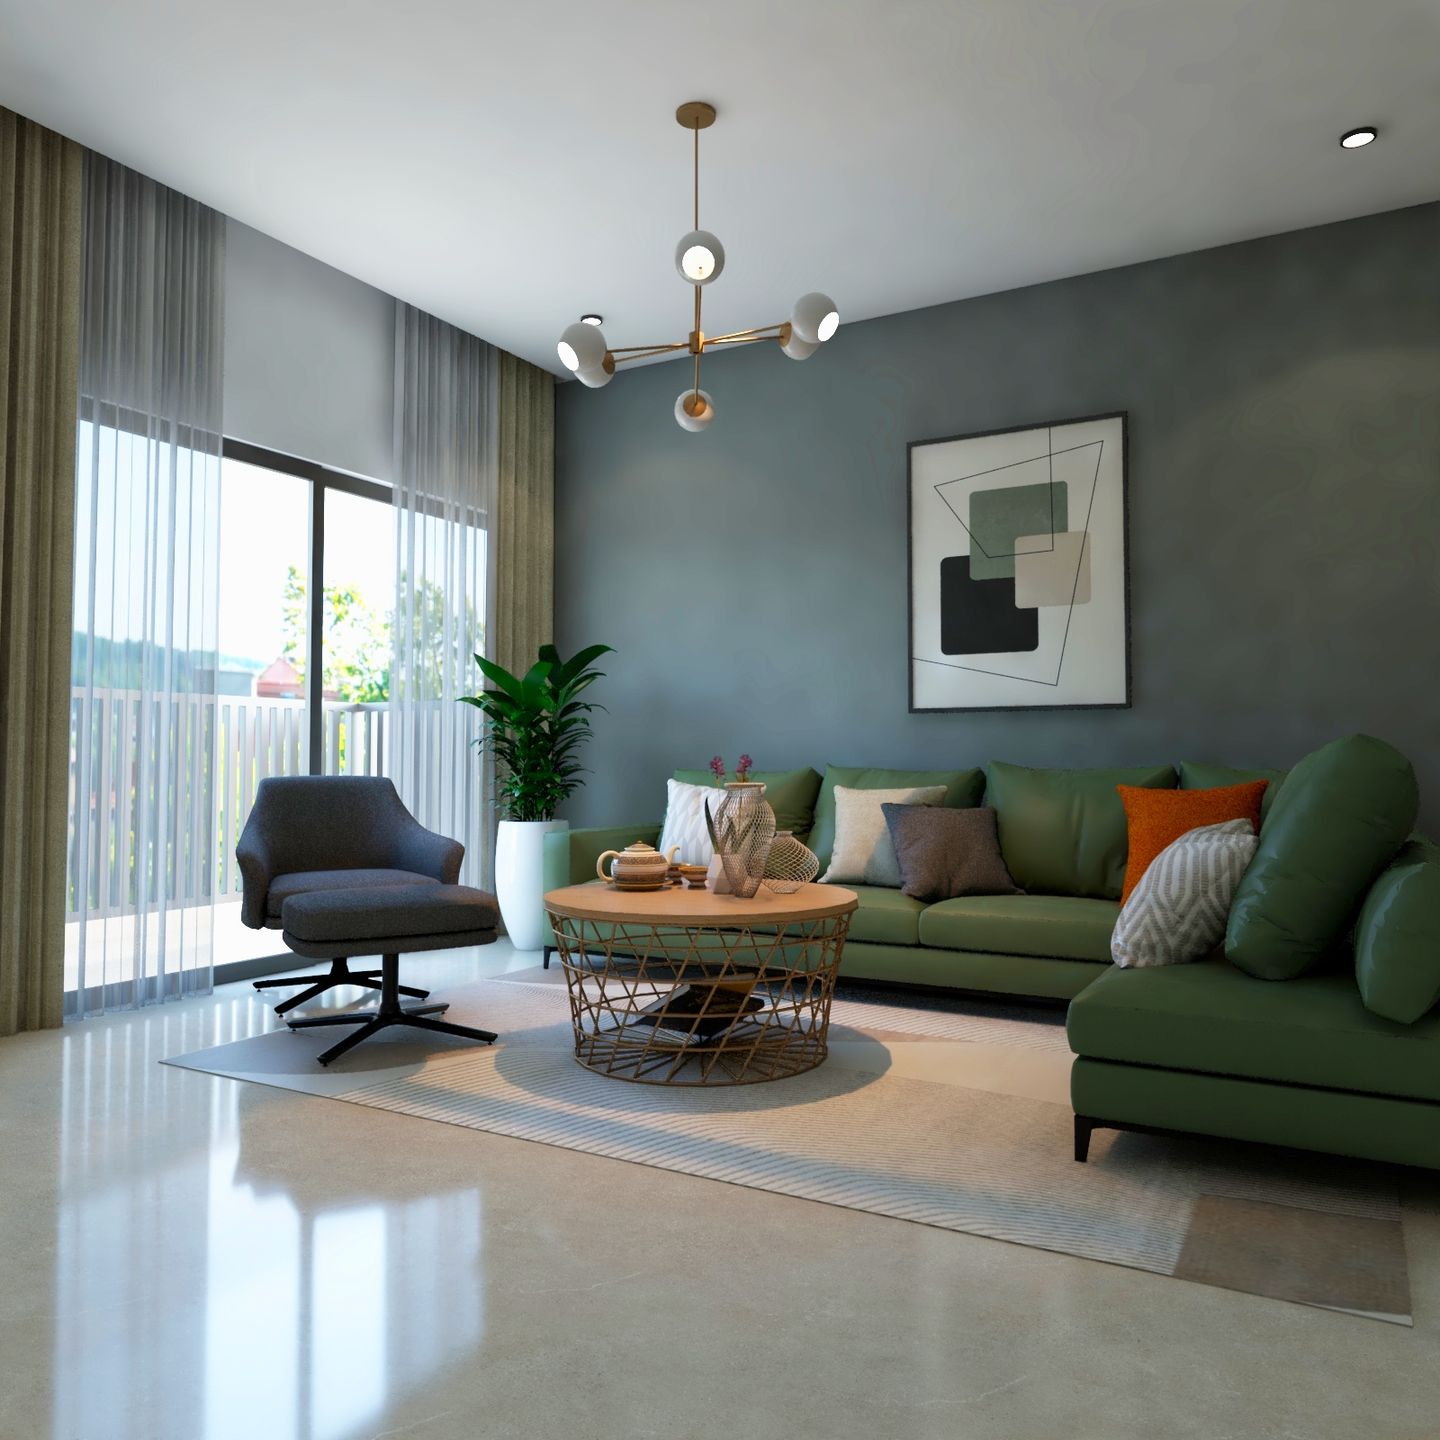 Grey Living Room Wall Paint Design With Dark Green Sectional Sofa And Circular Brown Coffee Table - Livspace